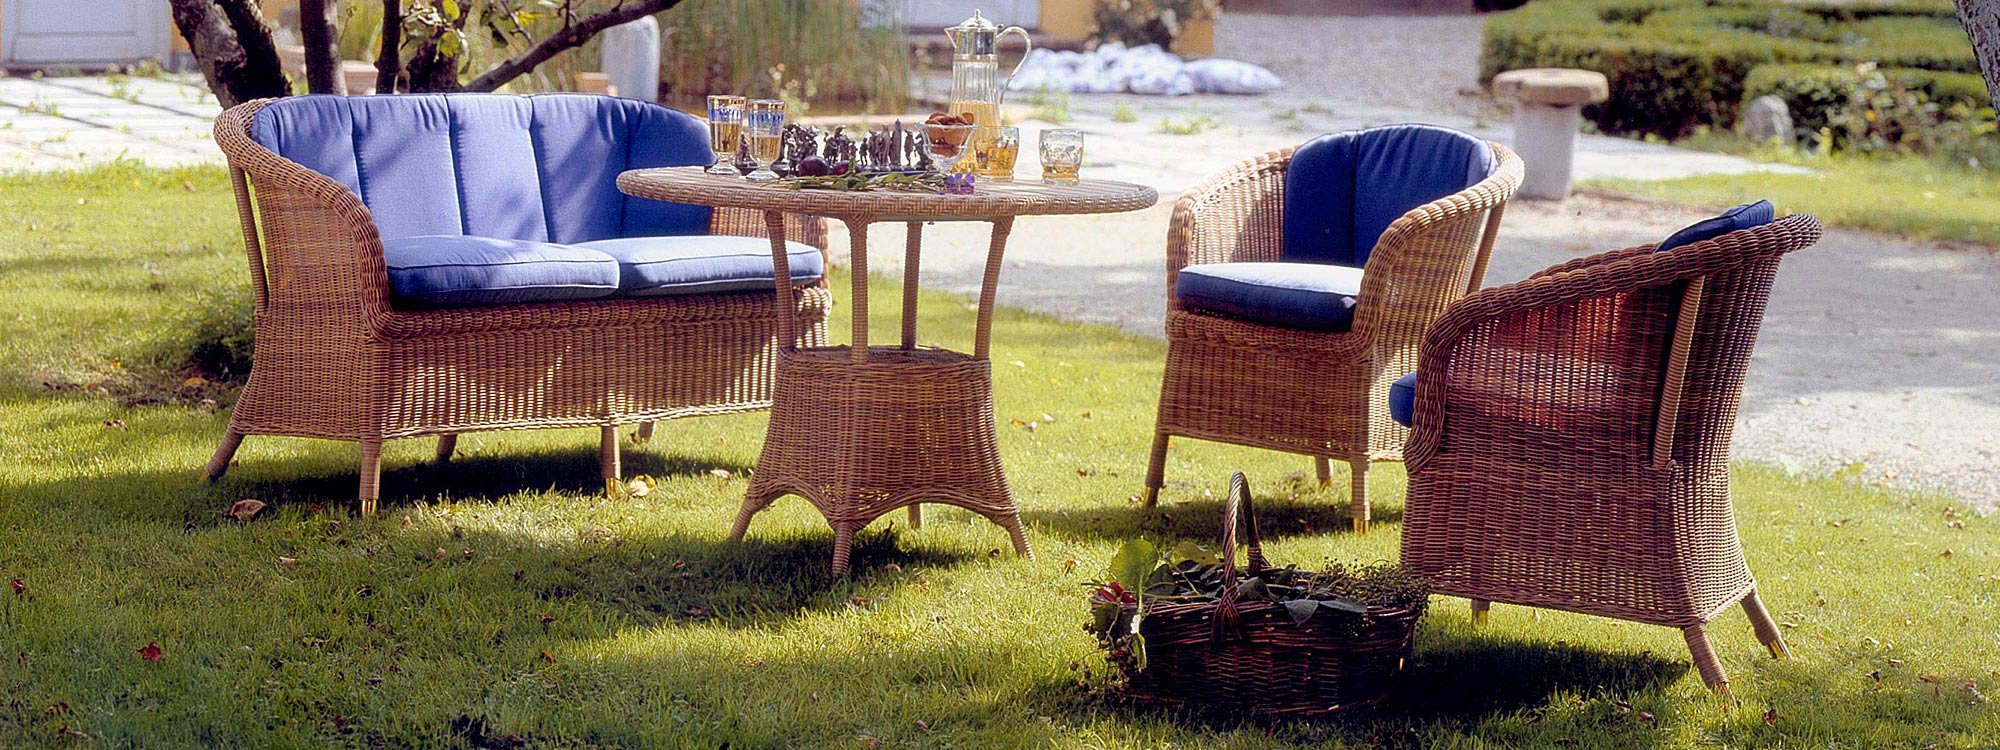 Image of Derby classic rattan garden chair in natural Cane-line weave by Cane-line